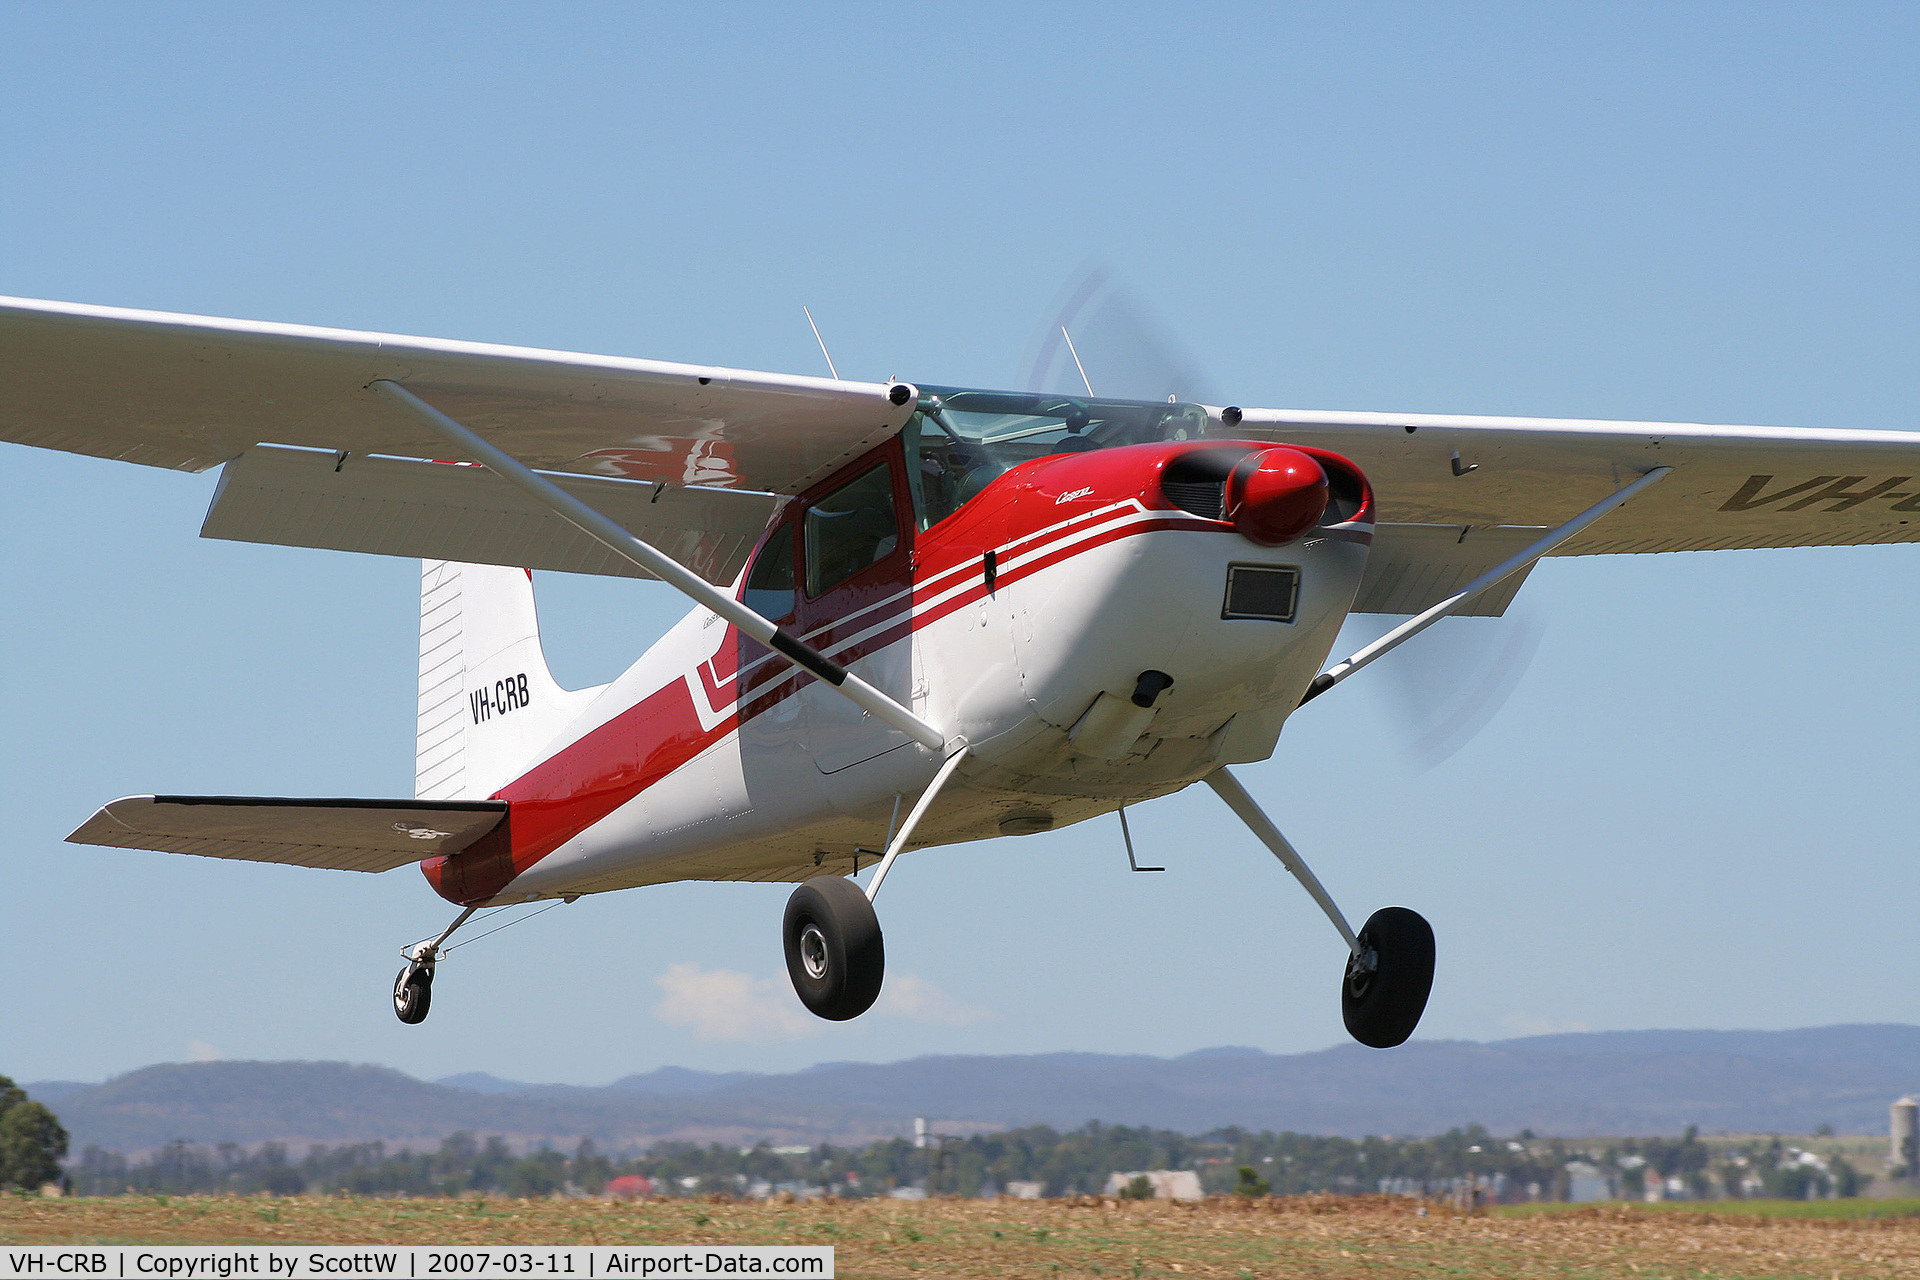 VH-CRB, 1962 Cessna 180E C/N 18051150, image taken at a aprivate airfield Clifton S.E QLD Australia